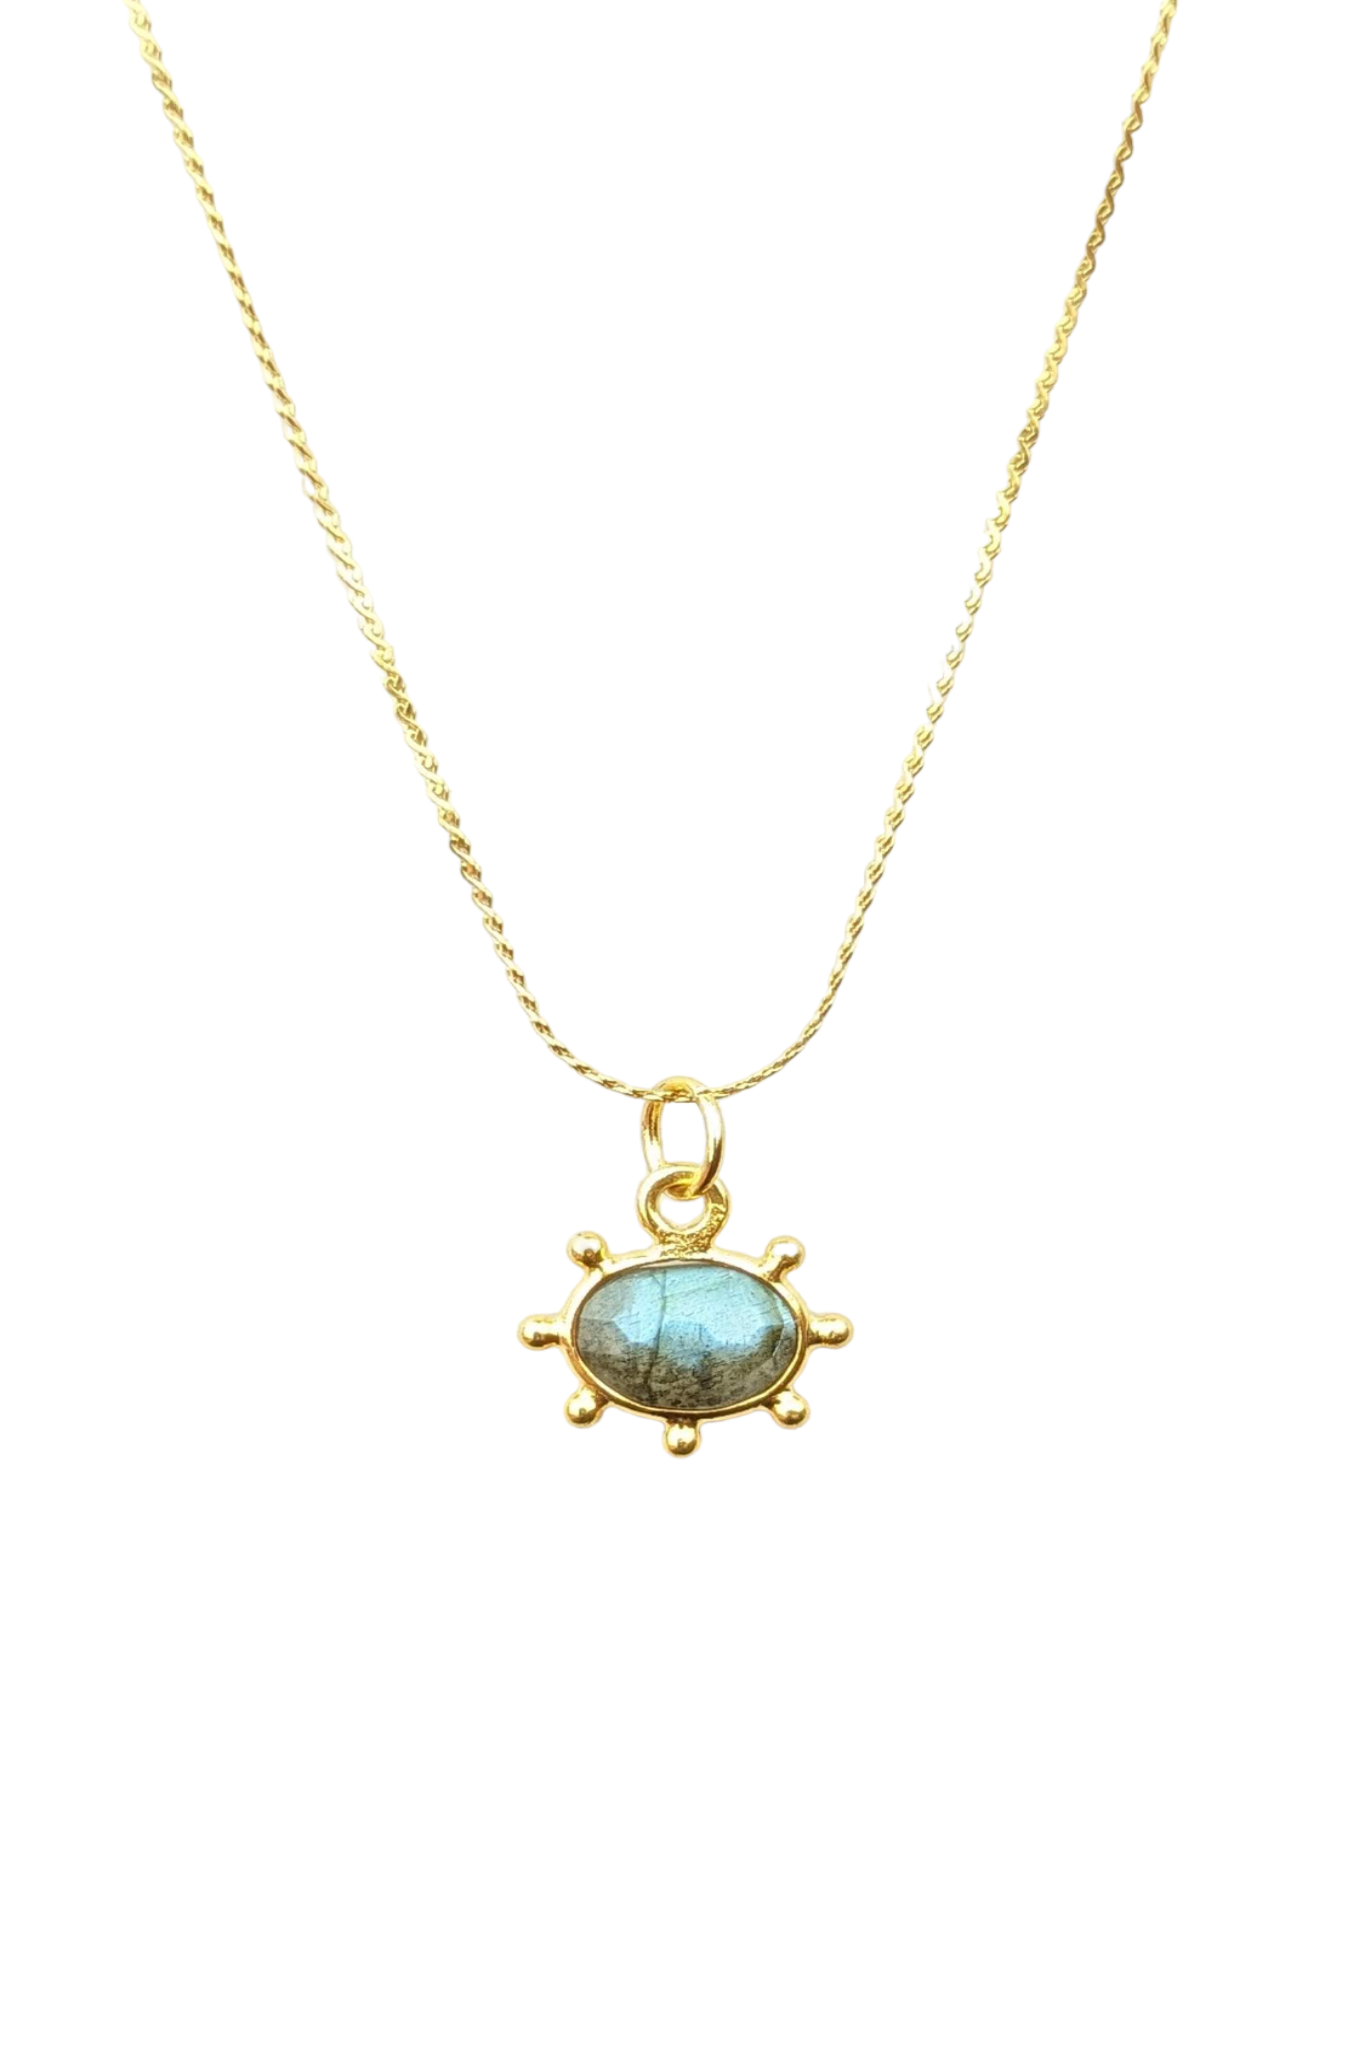 Visualise - Lucid Dreaming - Crown Chakra labradorite pendant necklace stay gold by mme bovary